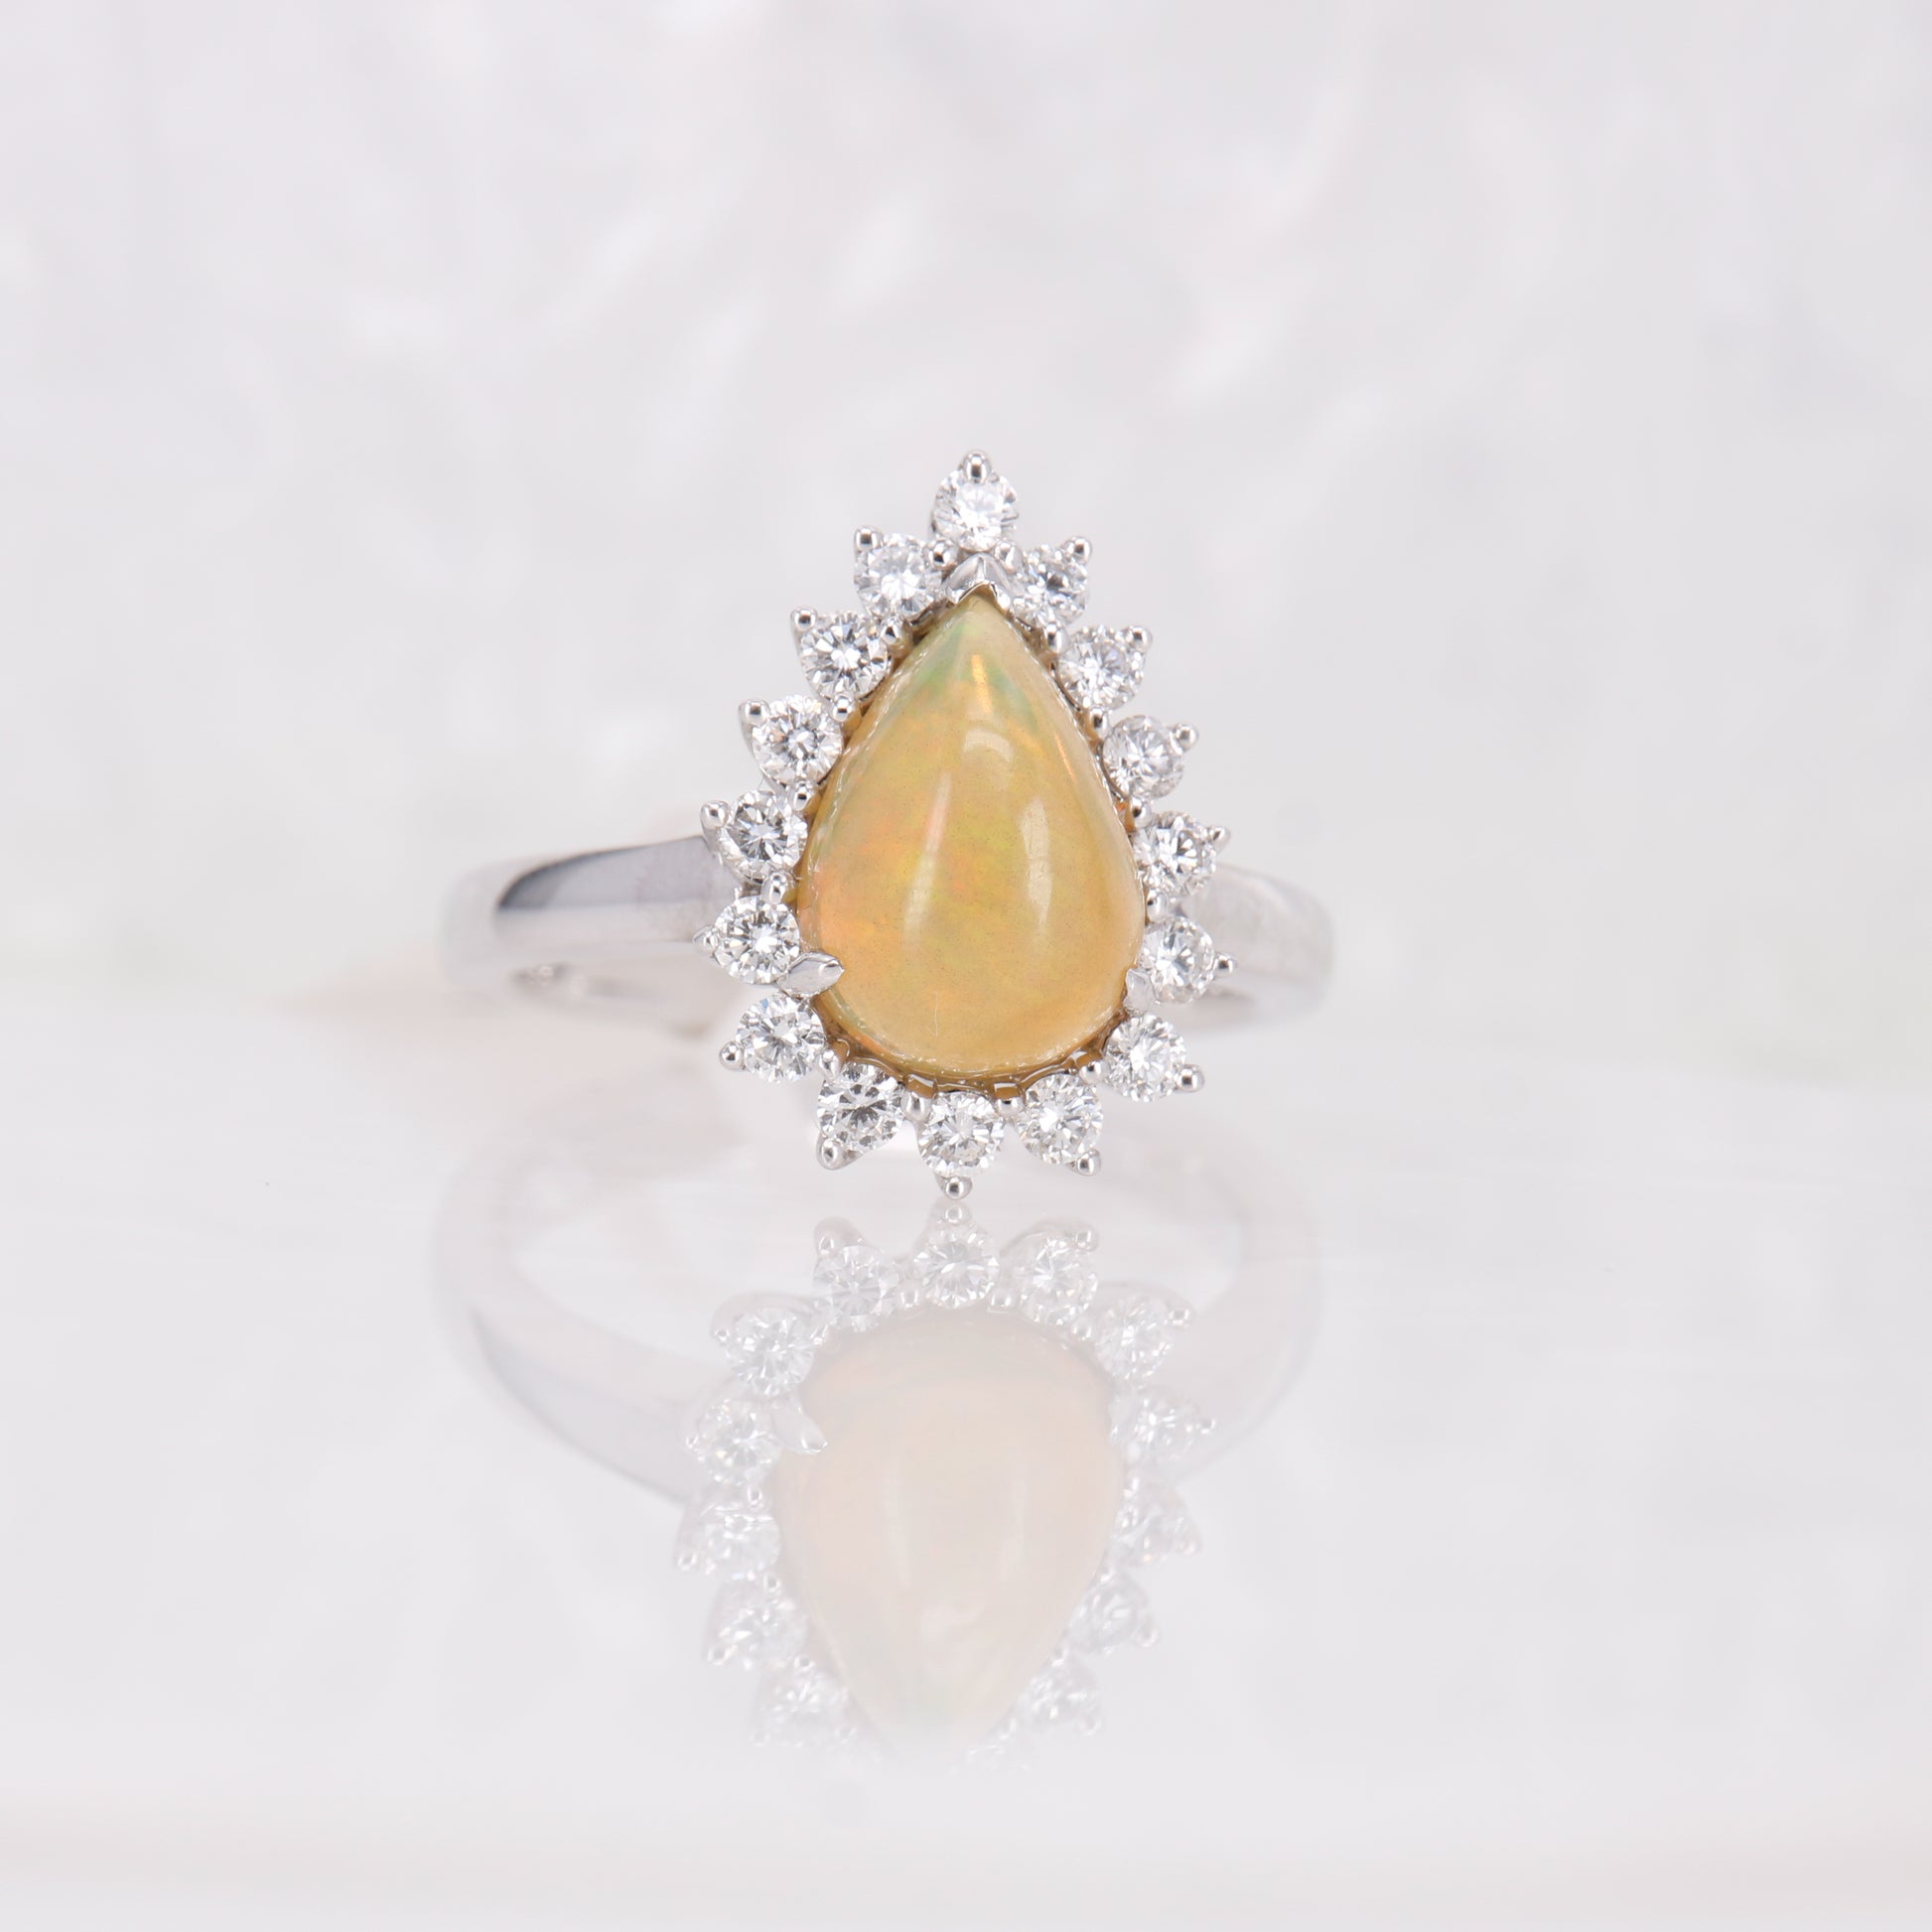 Opal and Diamond Ring. Pear cut opal surrounded by a halo of round brilliant diamonds.